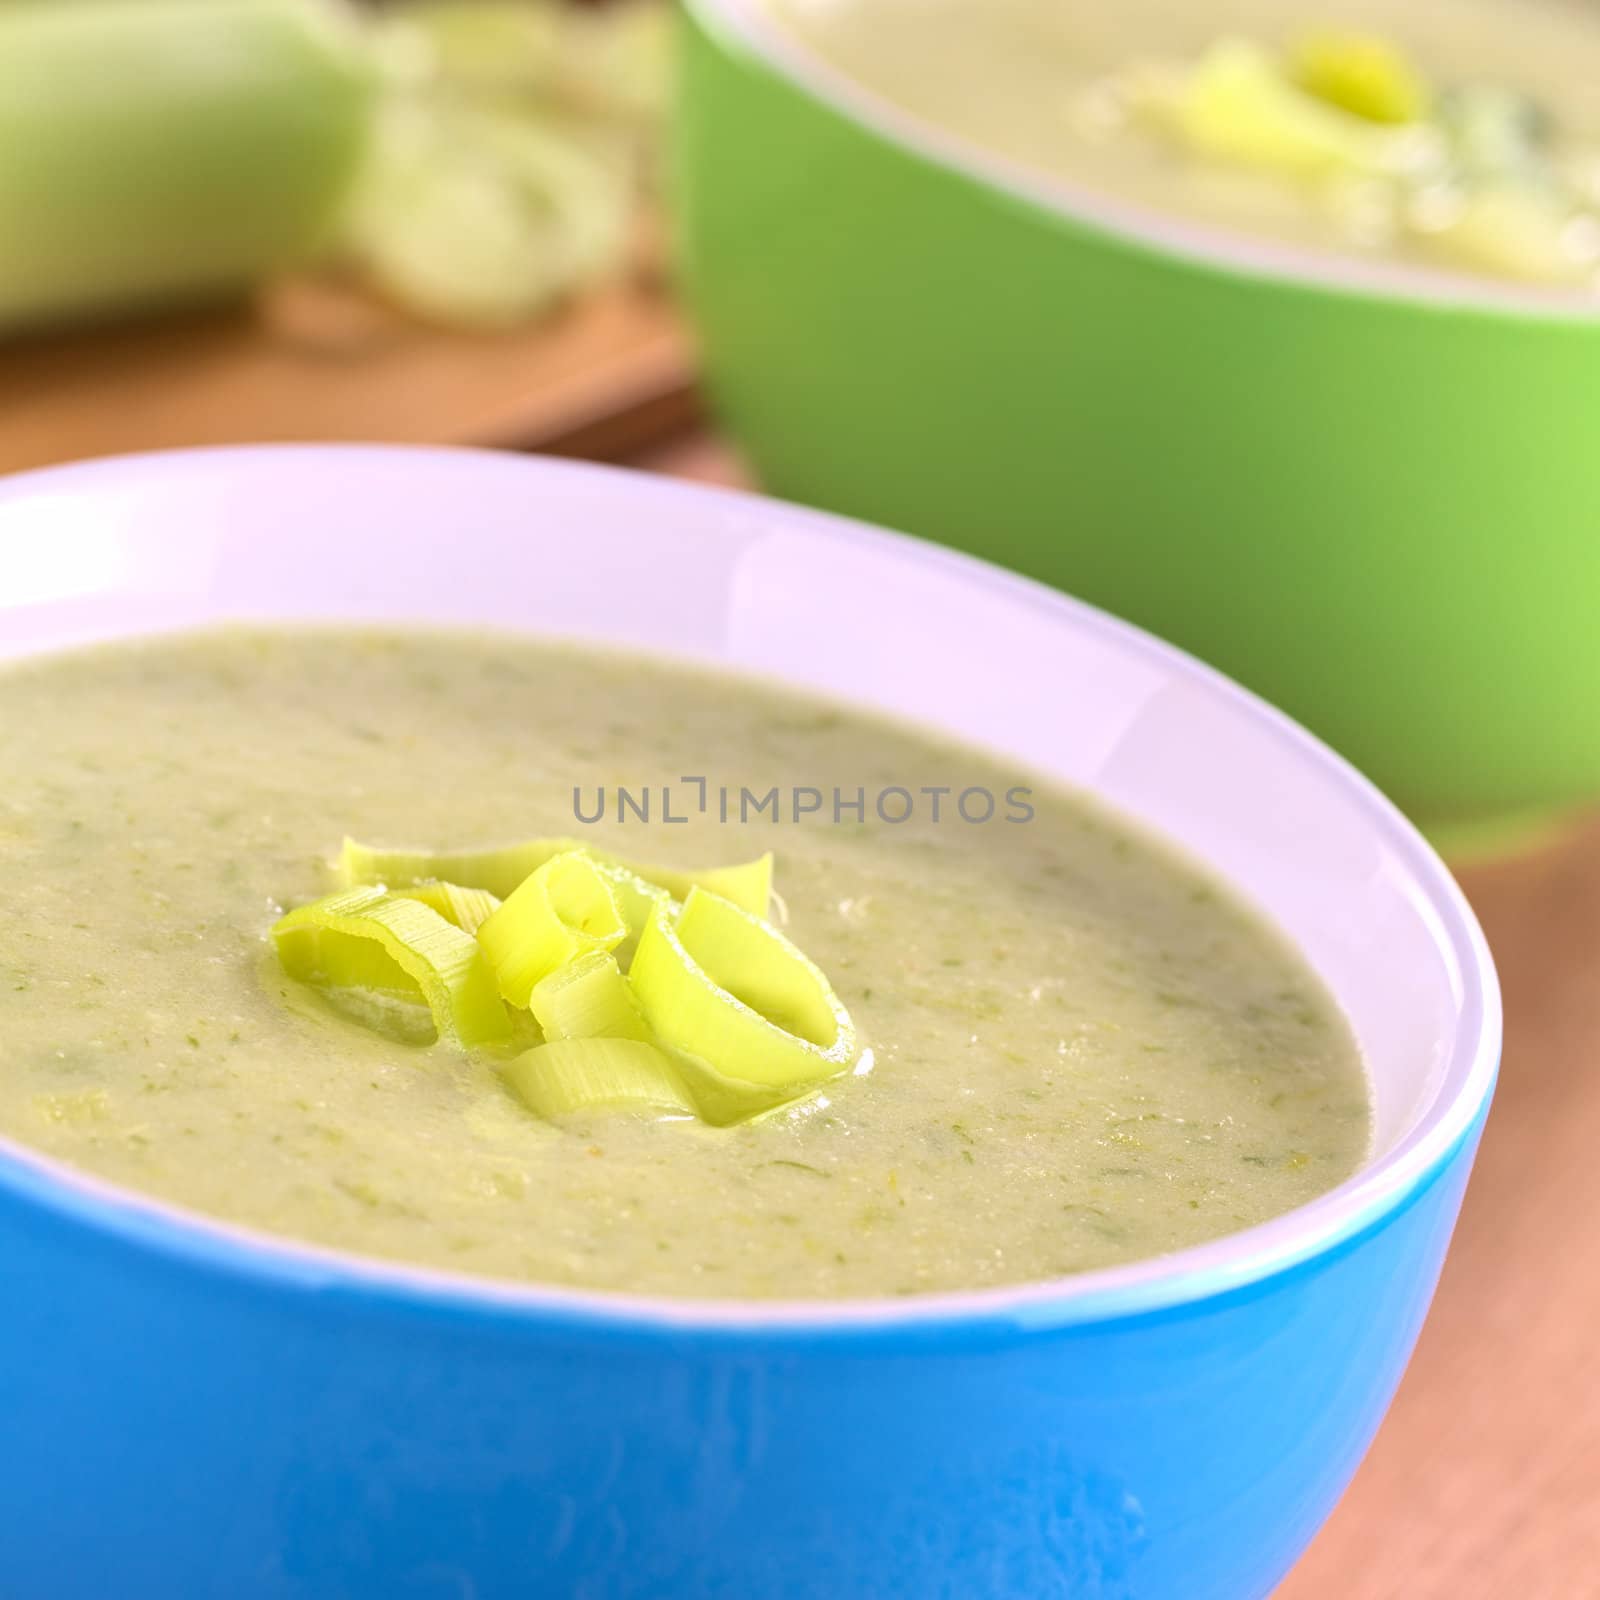 Fresh homemade leek soup (Selective Focus, Focus on the leek rings on the top of the soup)